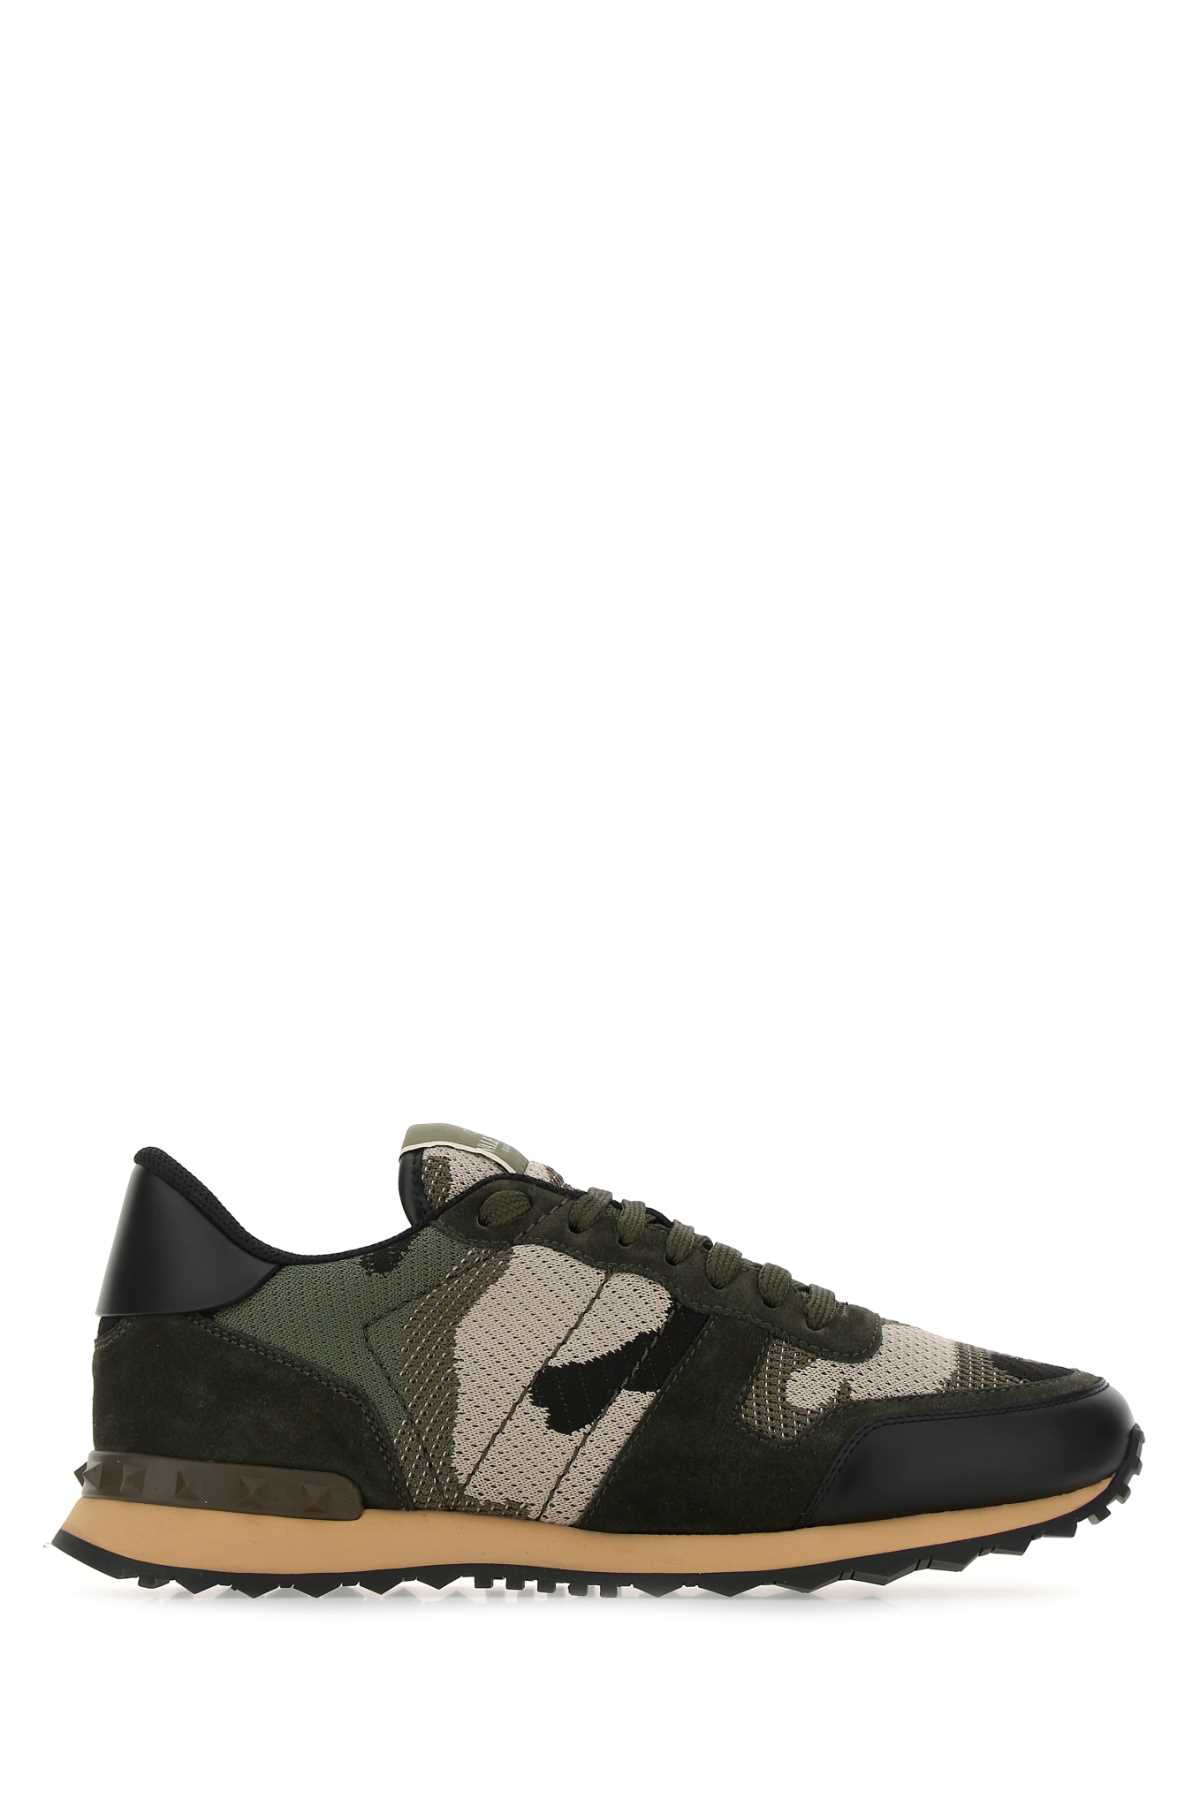 Multicolor Fabric And Leather Rockrunner Camouflage Sneakers